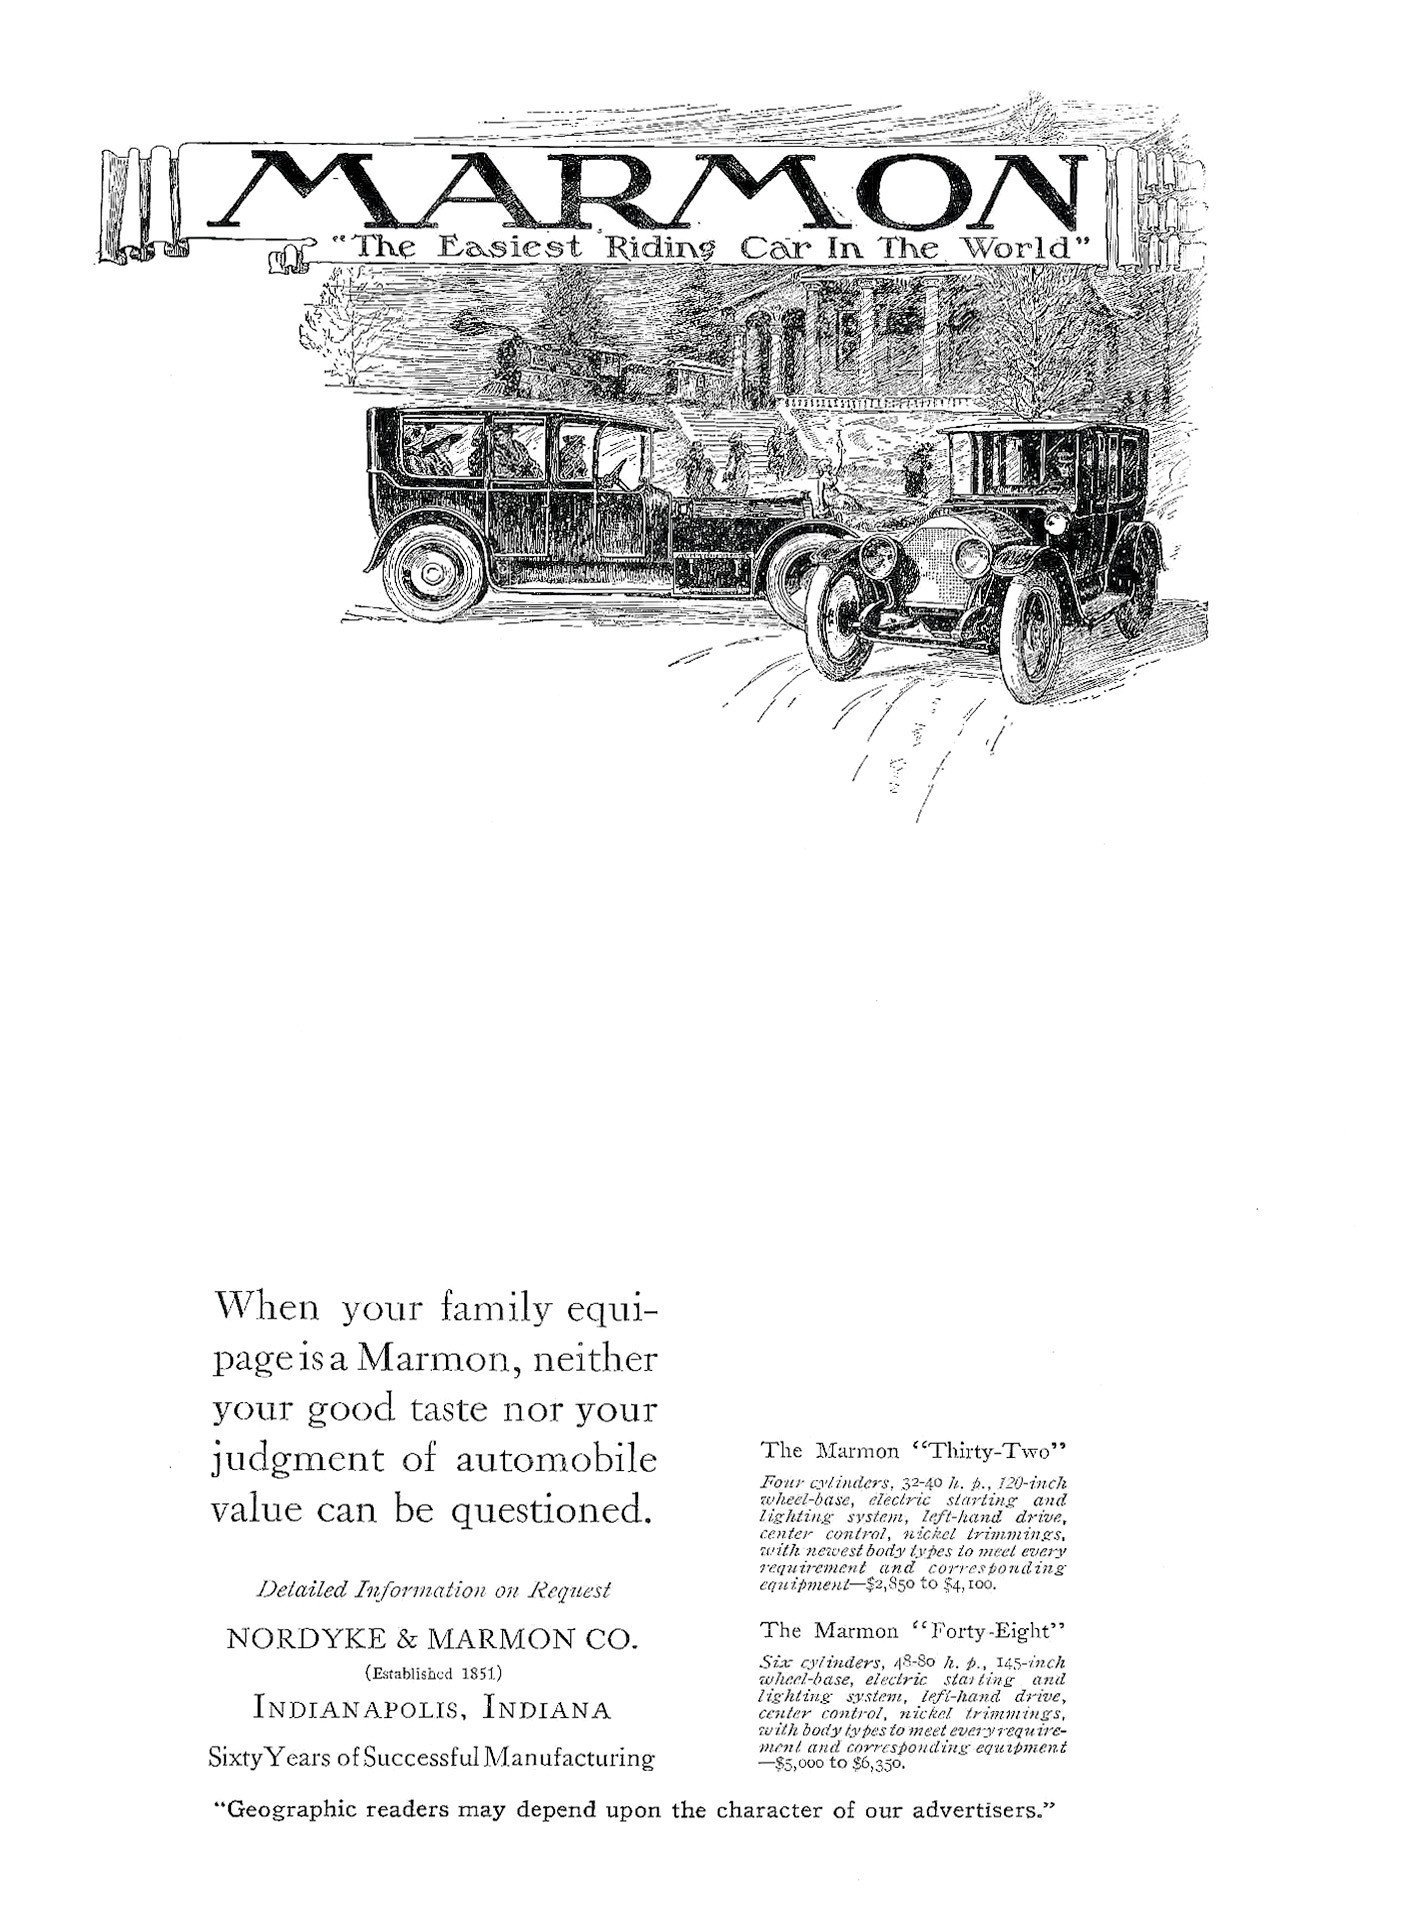 Vintage Auto Ads: Old-World Elegance In Modern Motoring, Courtesy Of Marmon